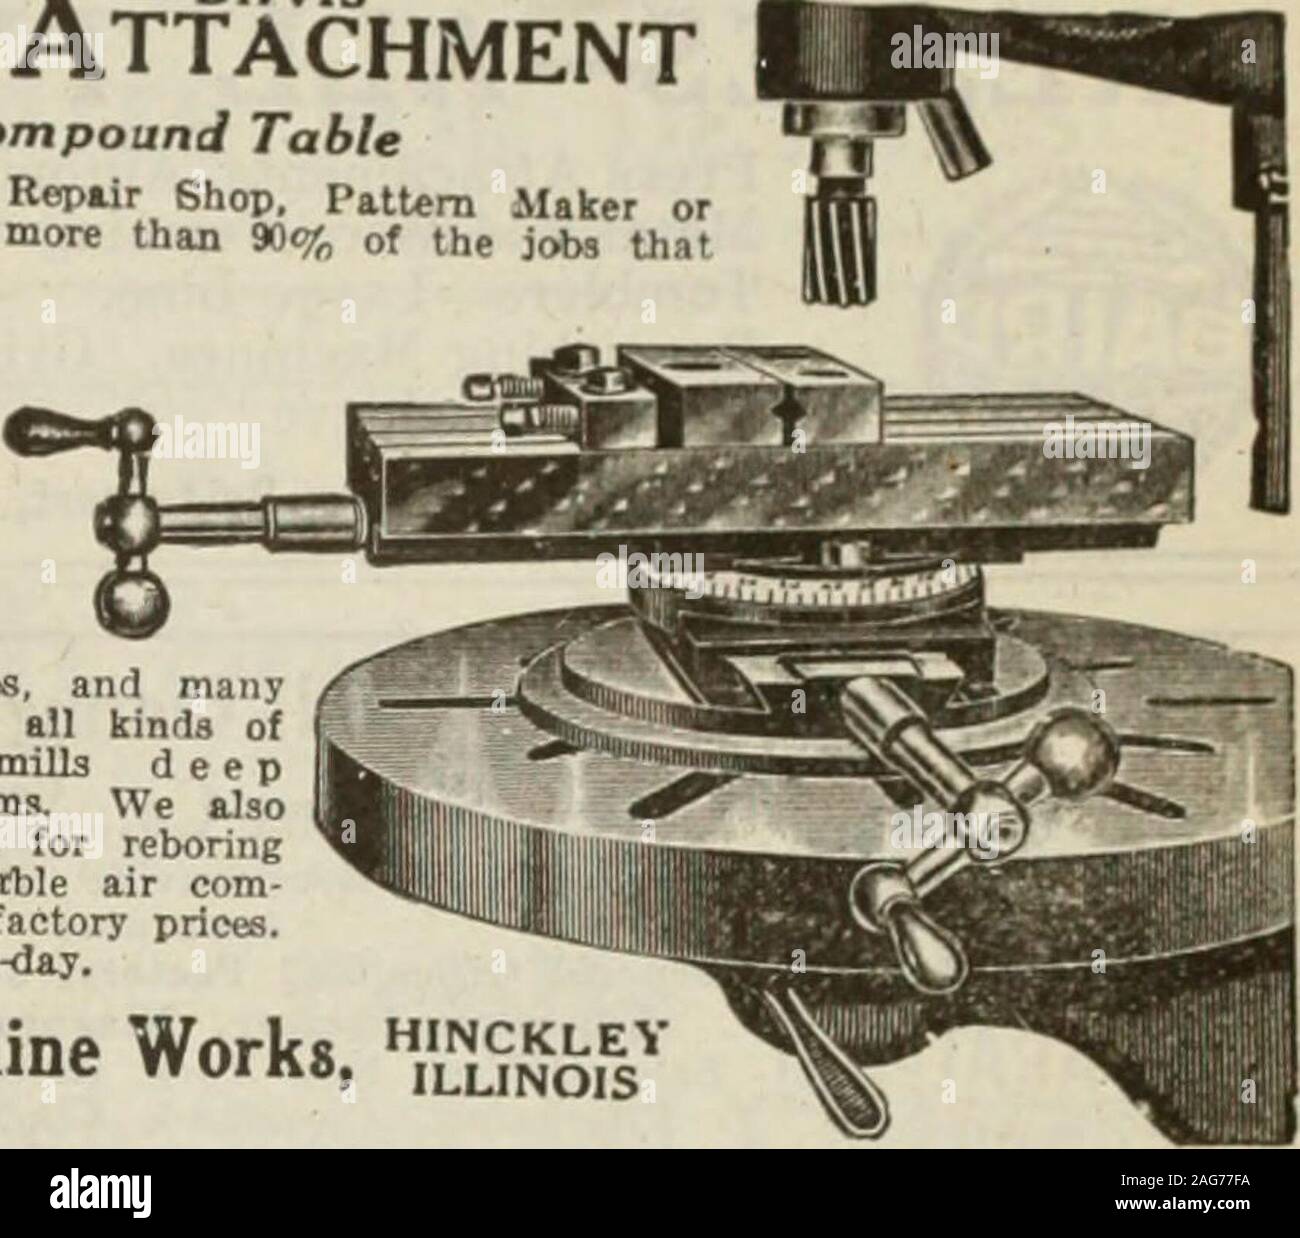 . Canadian machinery and metalworking (January-June 1919). ?=$8=J Milling Attachment and Compound Table For the Die Maker, Repair Shop, Pattern Maker ori.arage. will perform more than 90% of the jobs thatcome up. For any Drill Press14 to 42 swing.Big Economy — BigConvenience— SmallPrice. It relievesrour large millers,comes in handys p o tting castings,milling ends of bosses, and manyo her odd jobs. Cuts all kinds ofkeyseats perfectly; mills deepgrooves, slots and cams. We alsomake cylinder reamers for reboringFord car, and a reliable air com-pressor—all at special factory prices.Write for circ Stock Photo